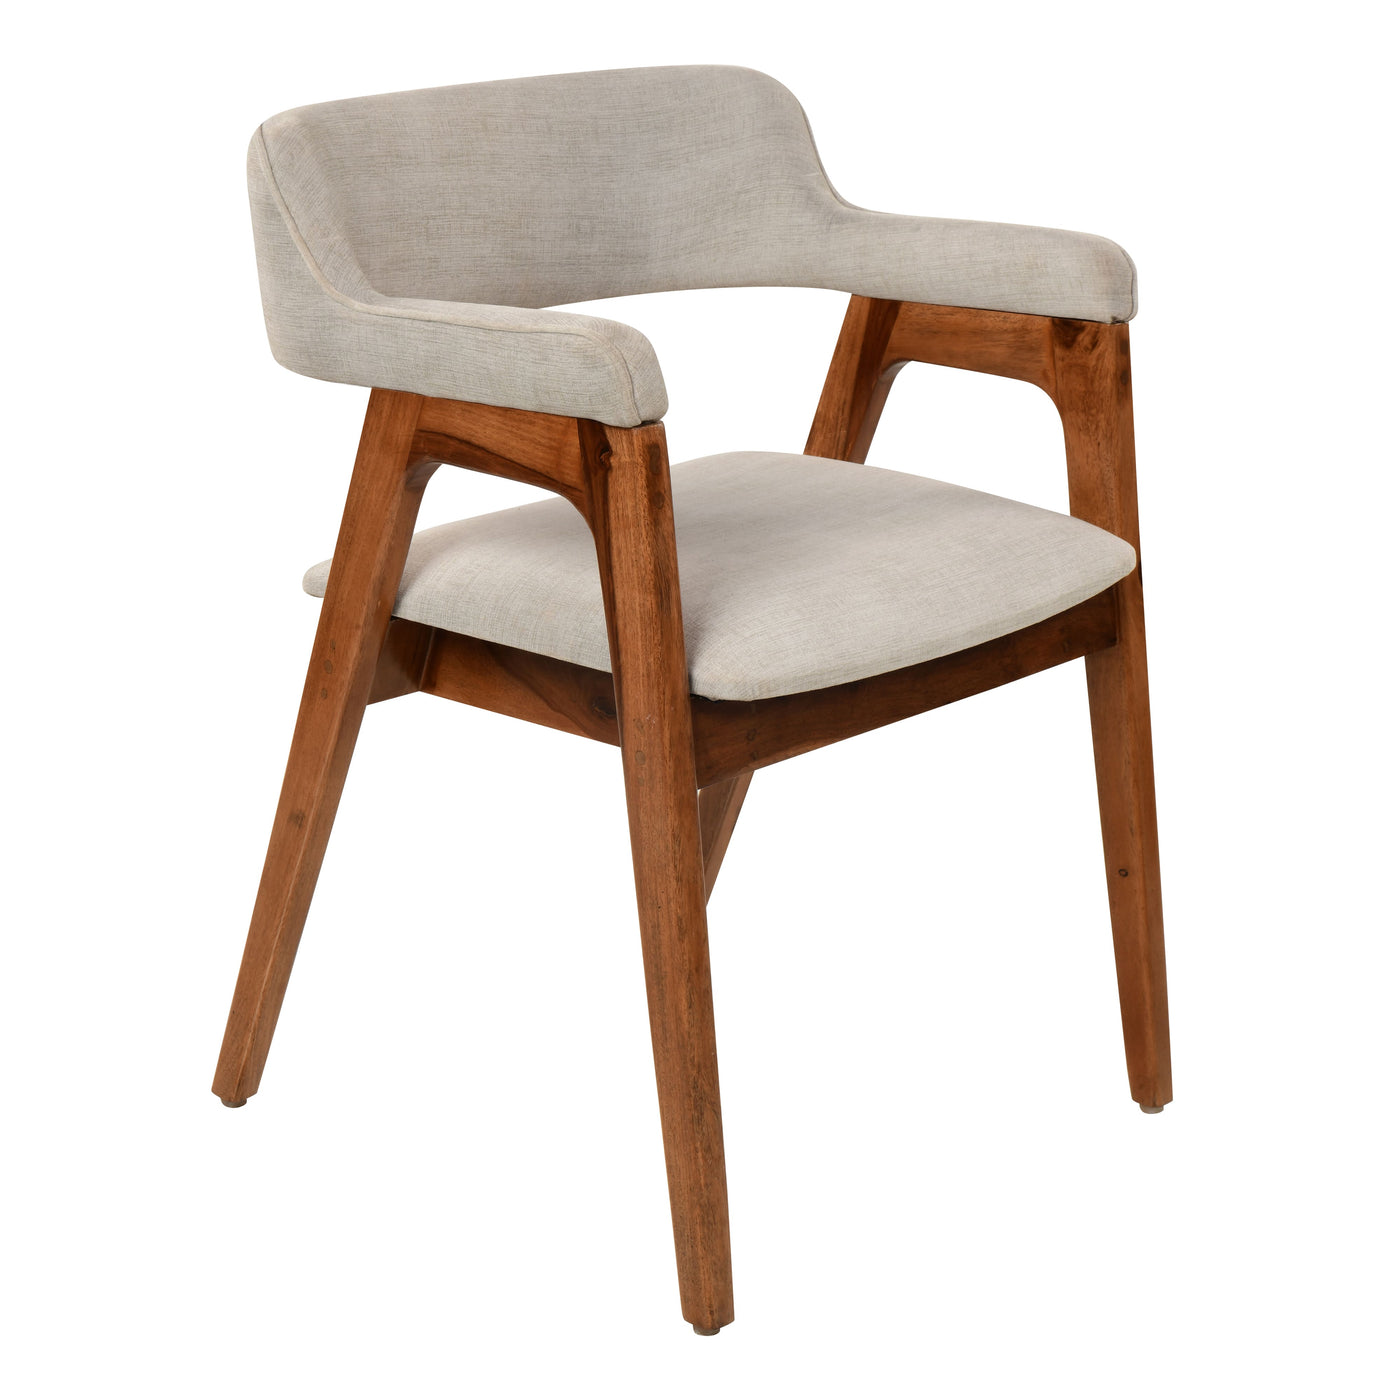 Giel Dining Chair